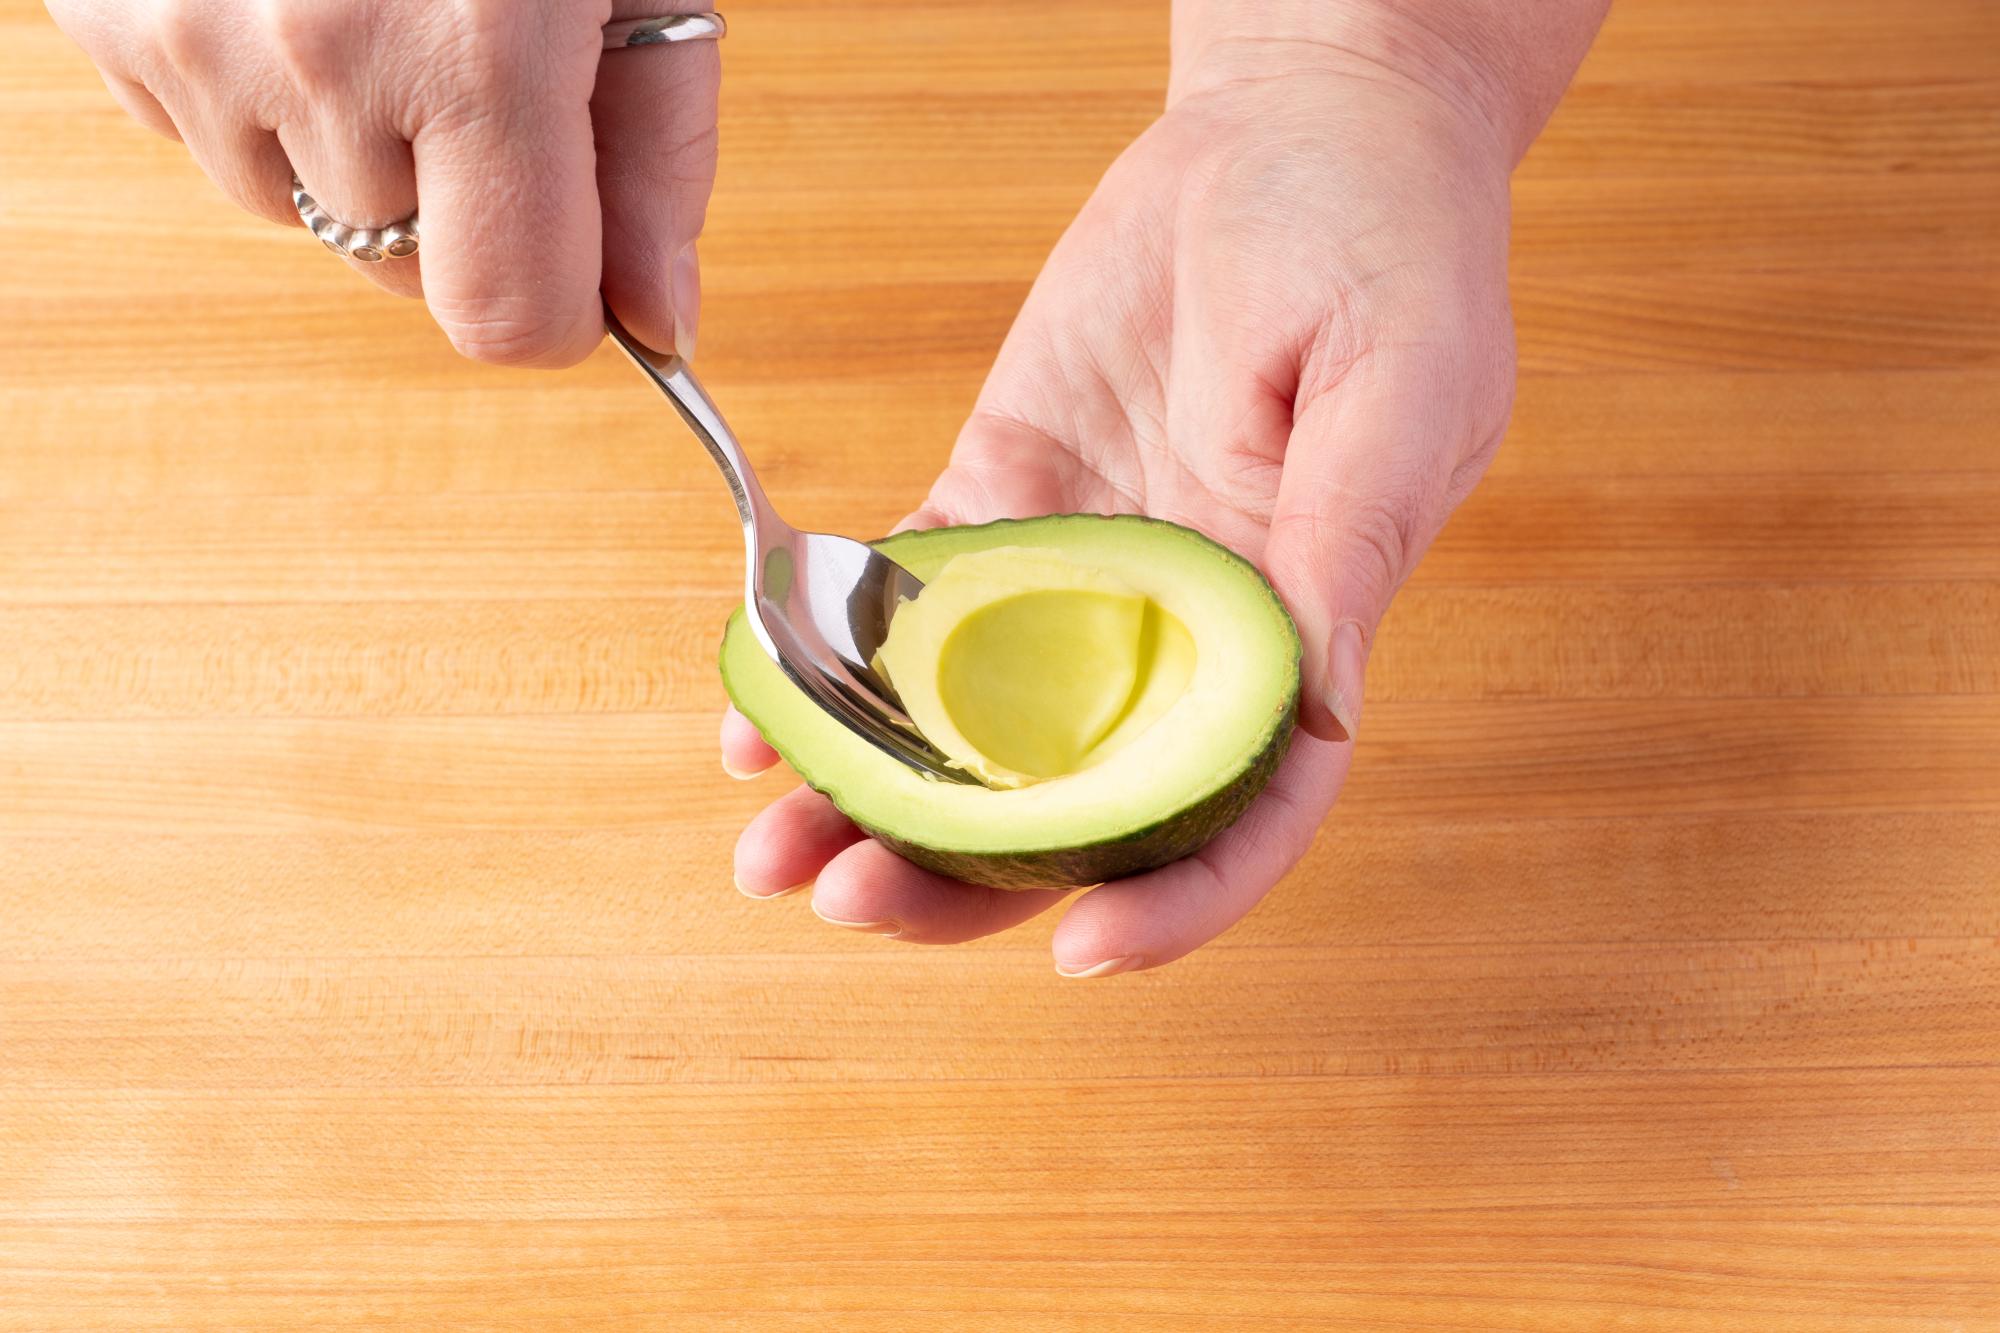 Use a spoon to scoop out the avocado.